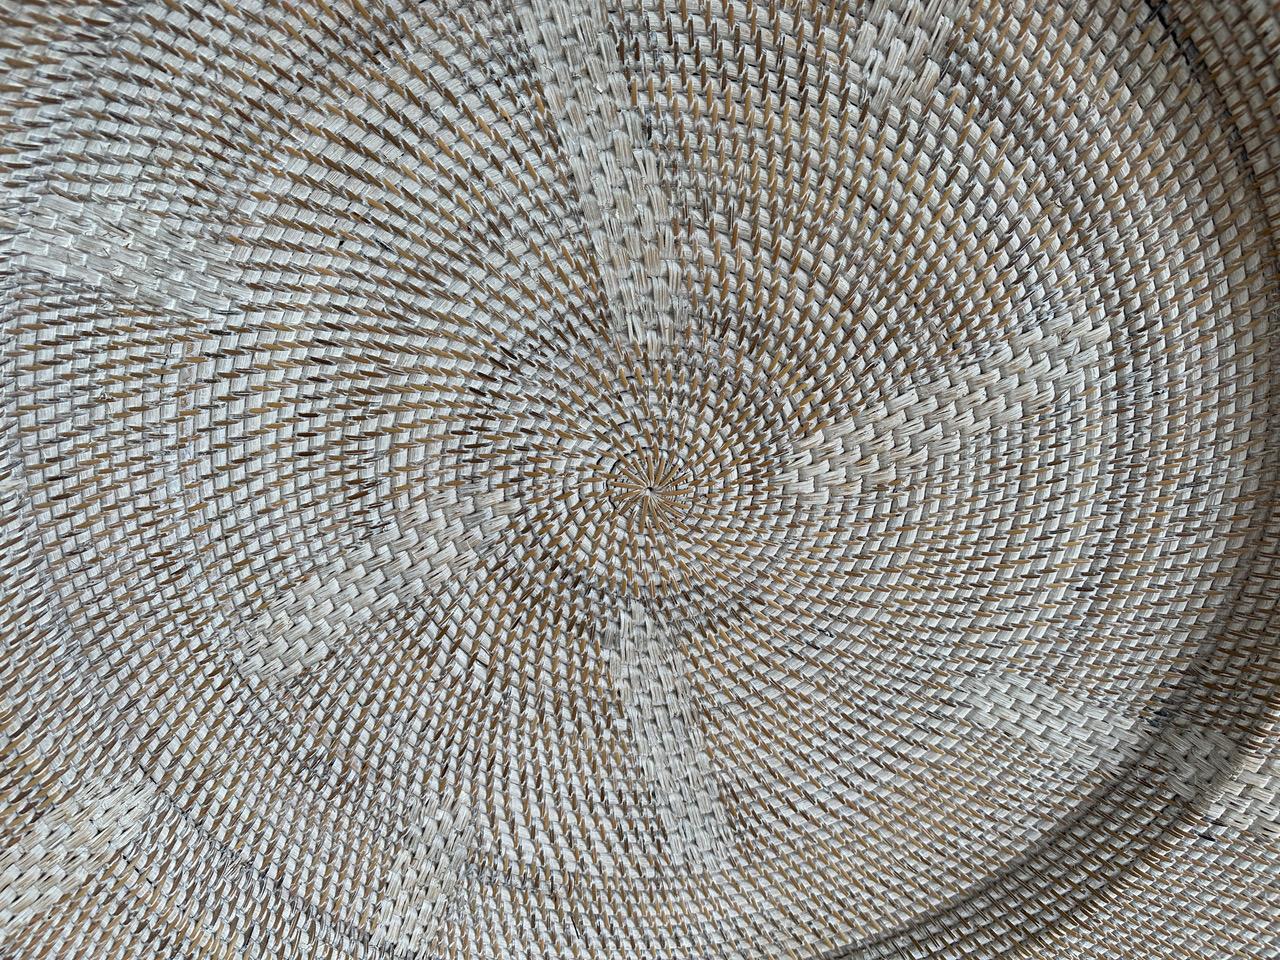 Beautiful oversized hand woven rattan platter. We added a white wash to this impressive piece. Fabulous hung on a wall, to hold towels by a pool, or to place magazines to name a few suggestions.

Own an Andrianna Shamaris original.

Andrianna